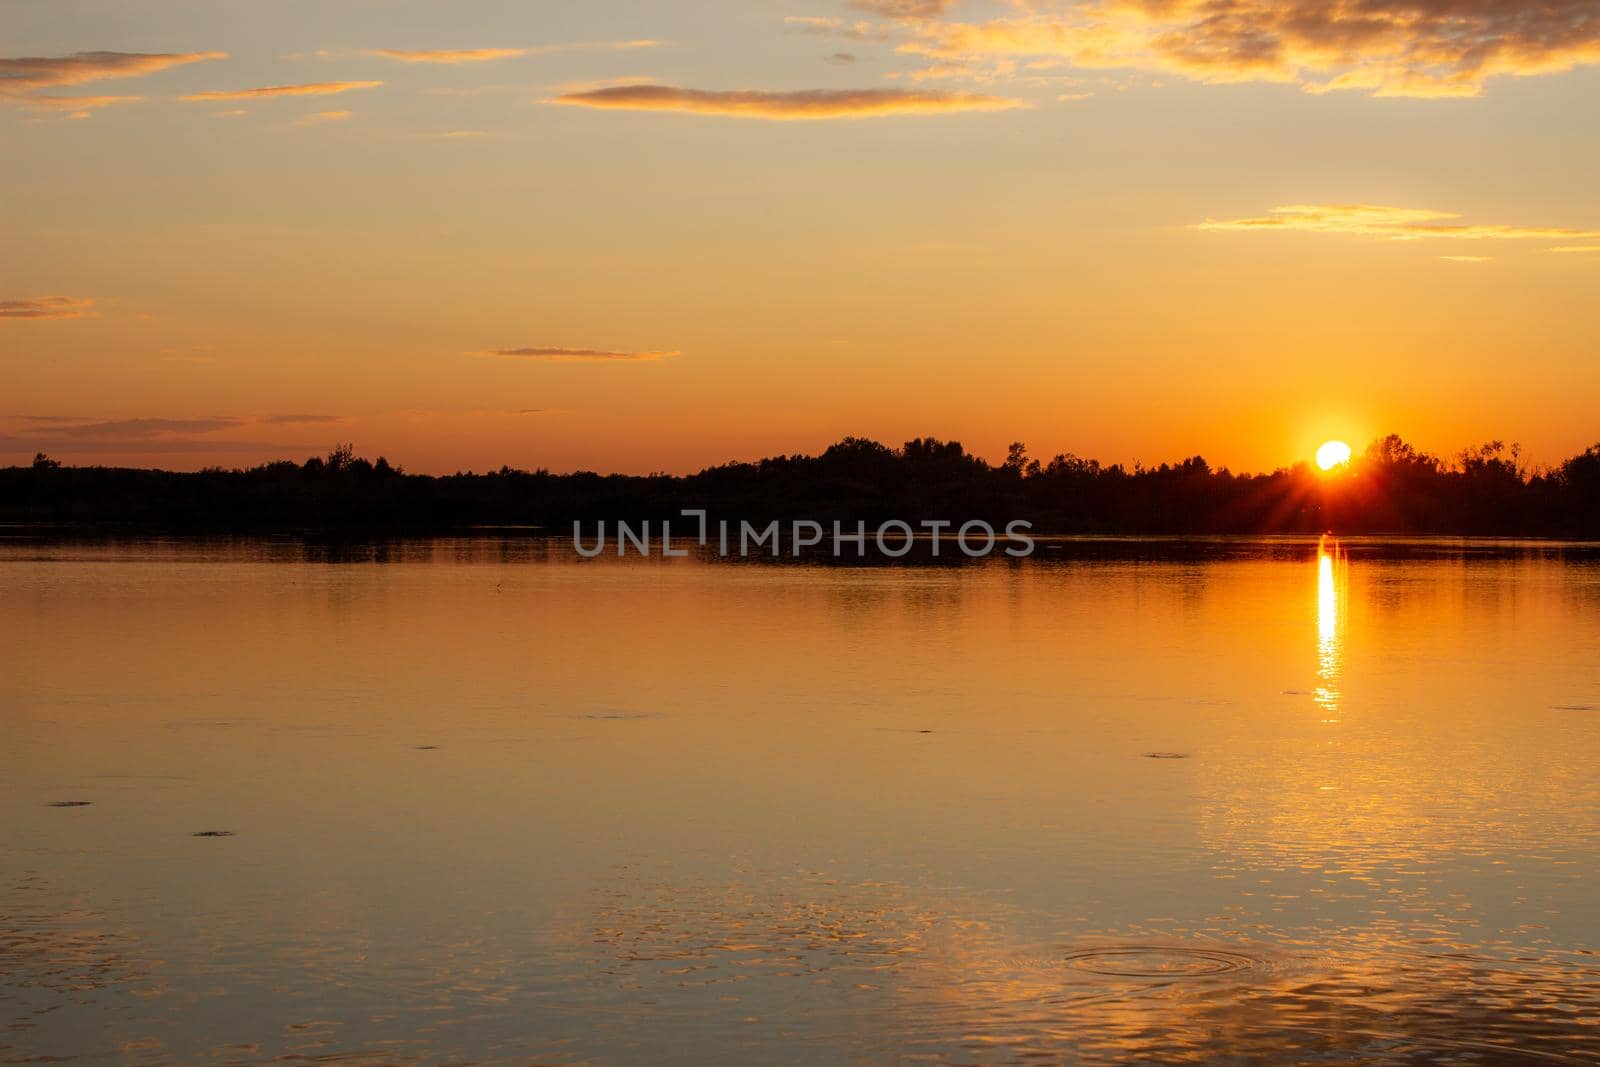 Colorful sunny sunset on a calm lake. The sun is reflected on the surface of the water.